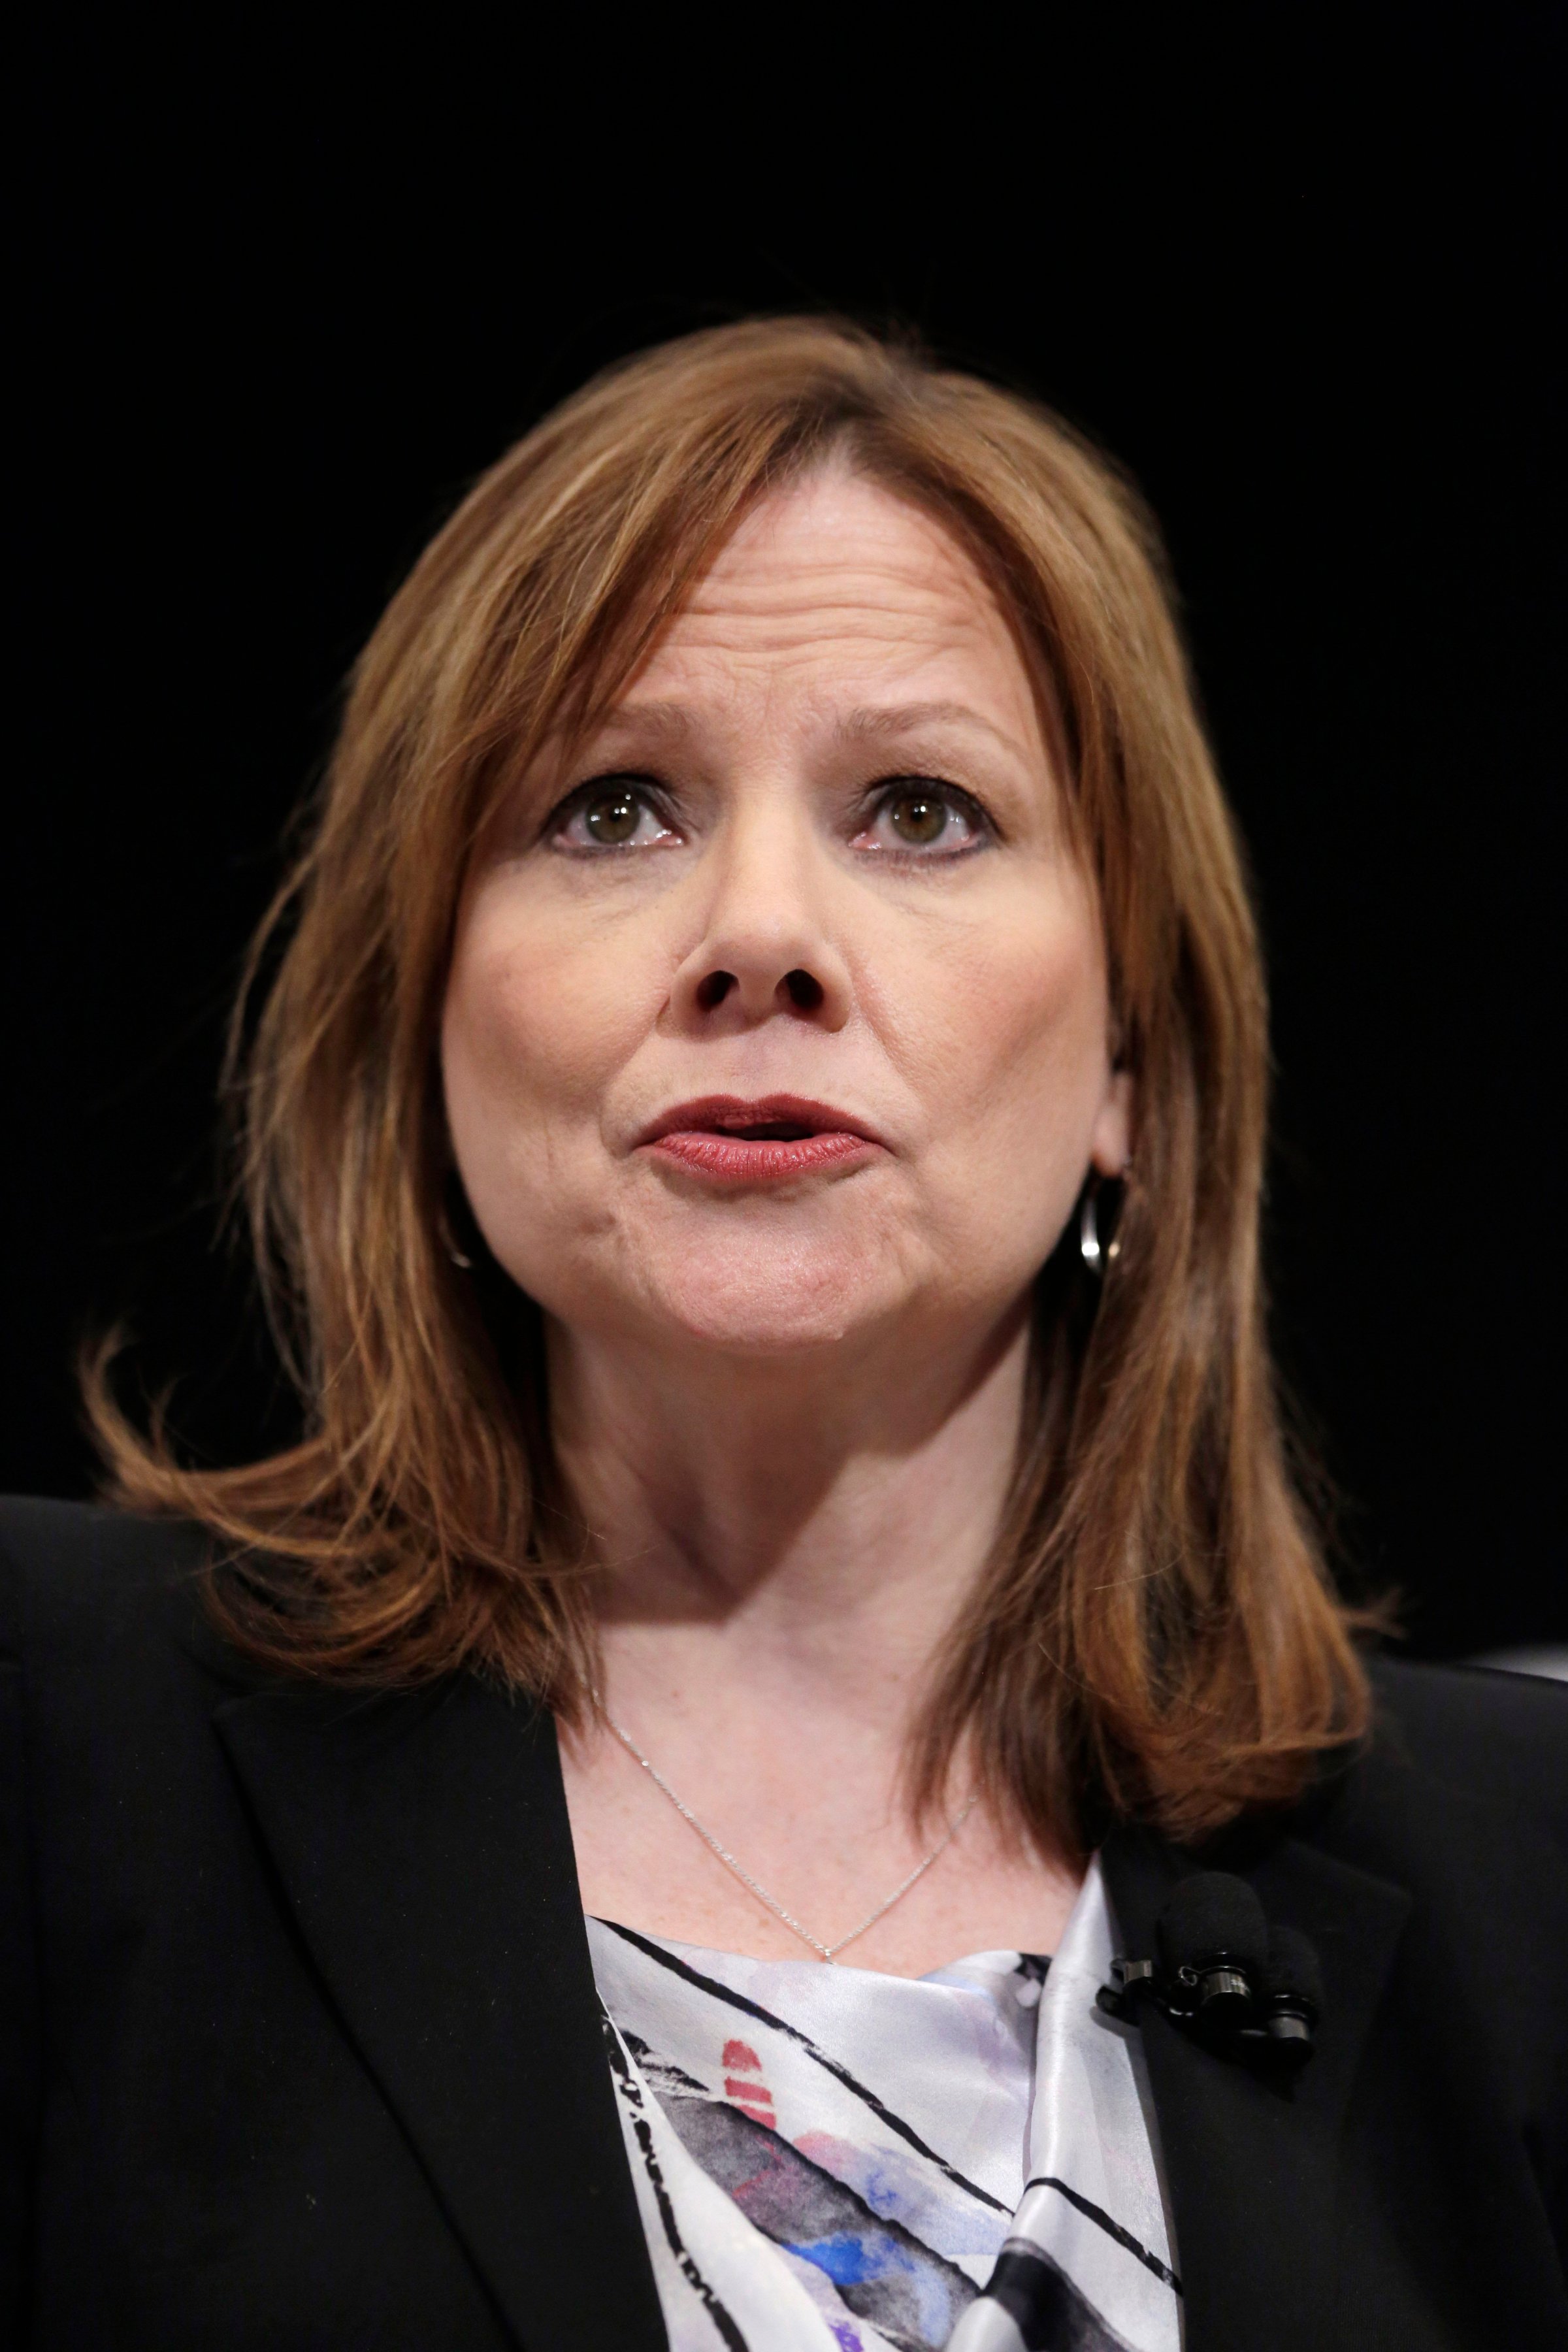 Mary Barra, CEO of General Motors, speaks at the New York International Auto Show, on April 15, 2014 in New York City.